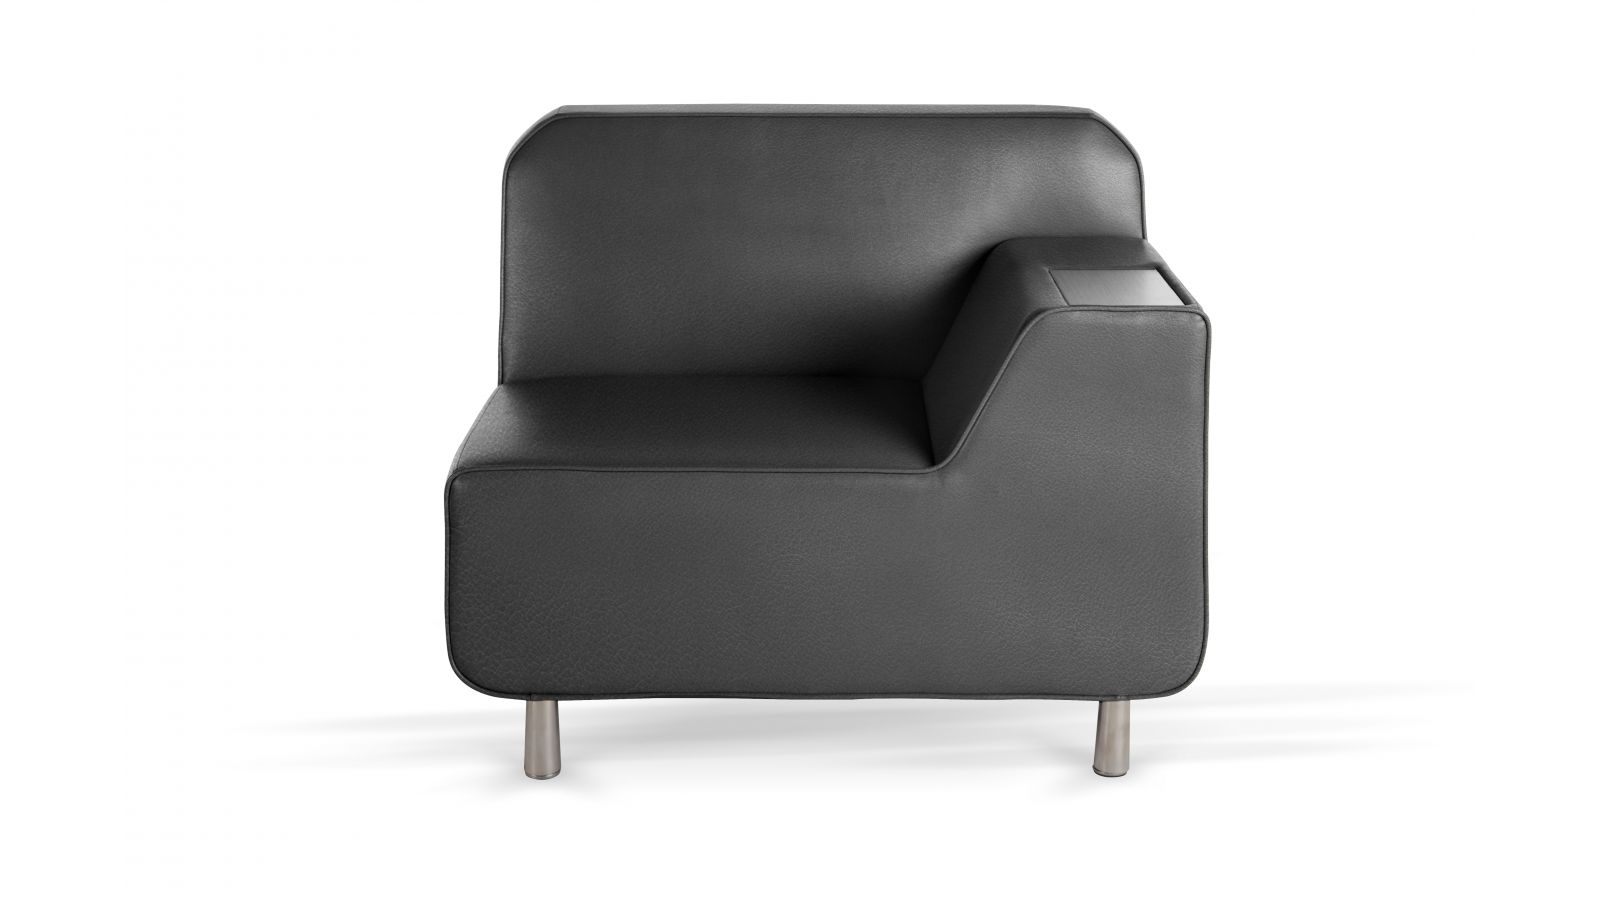 The OFM 5000 Soft-Seating Series